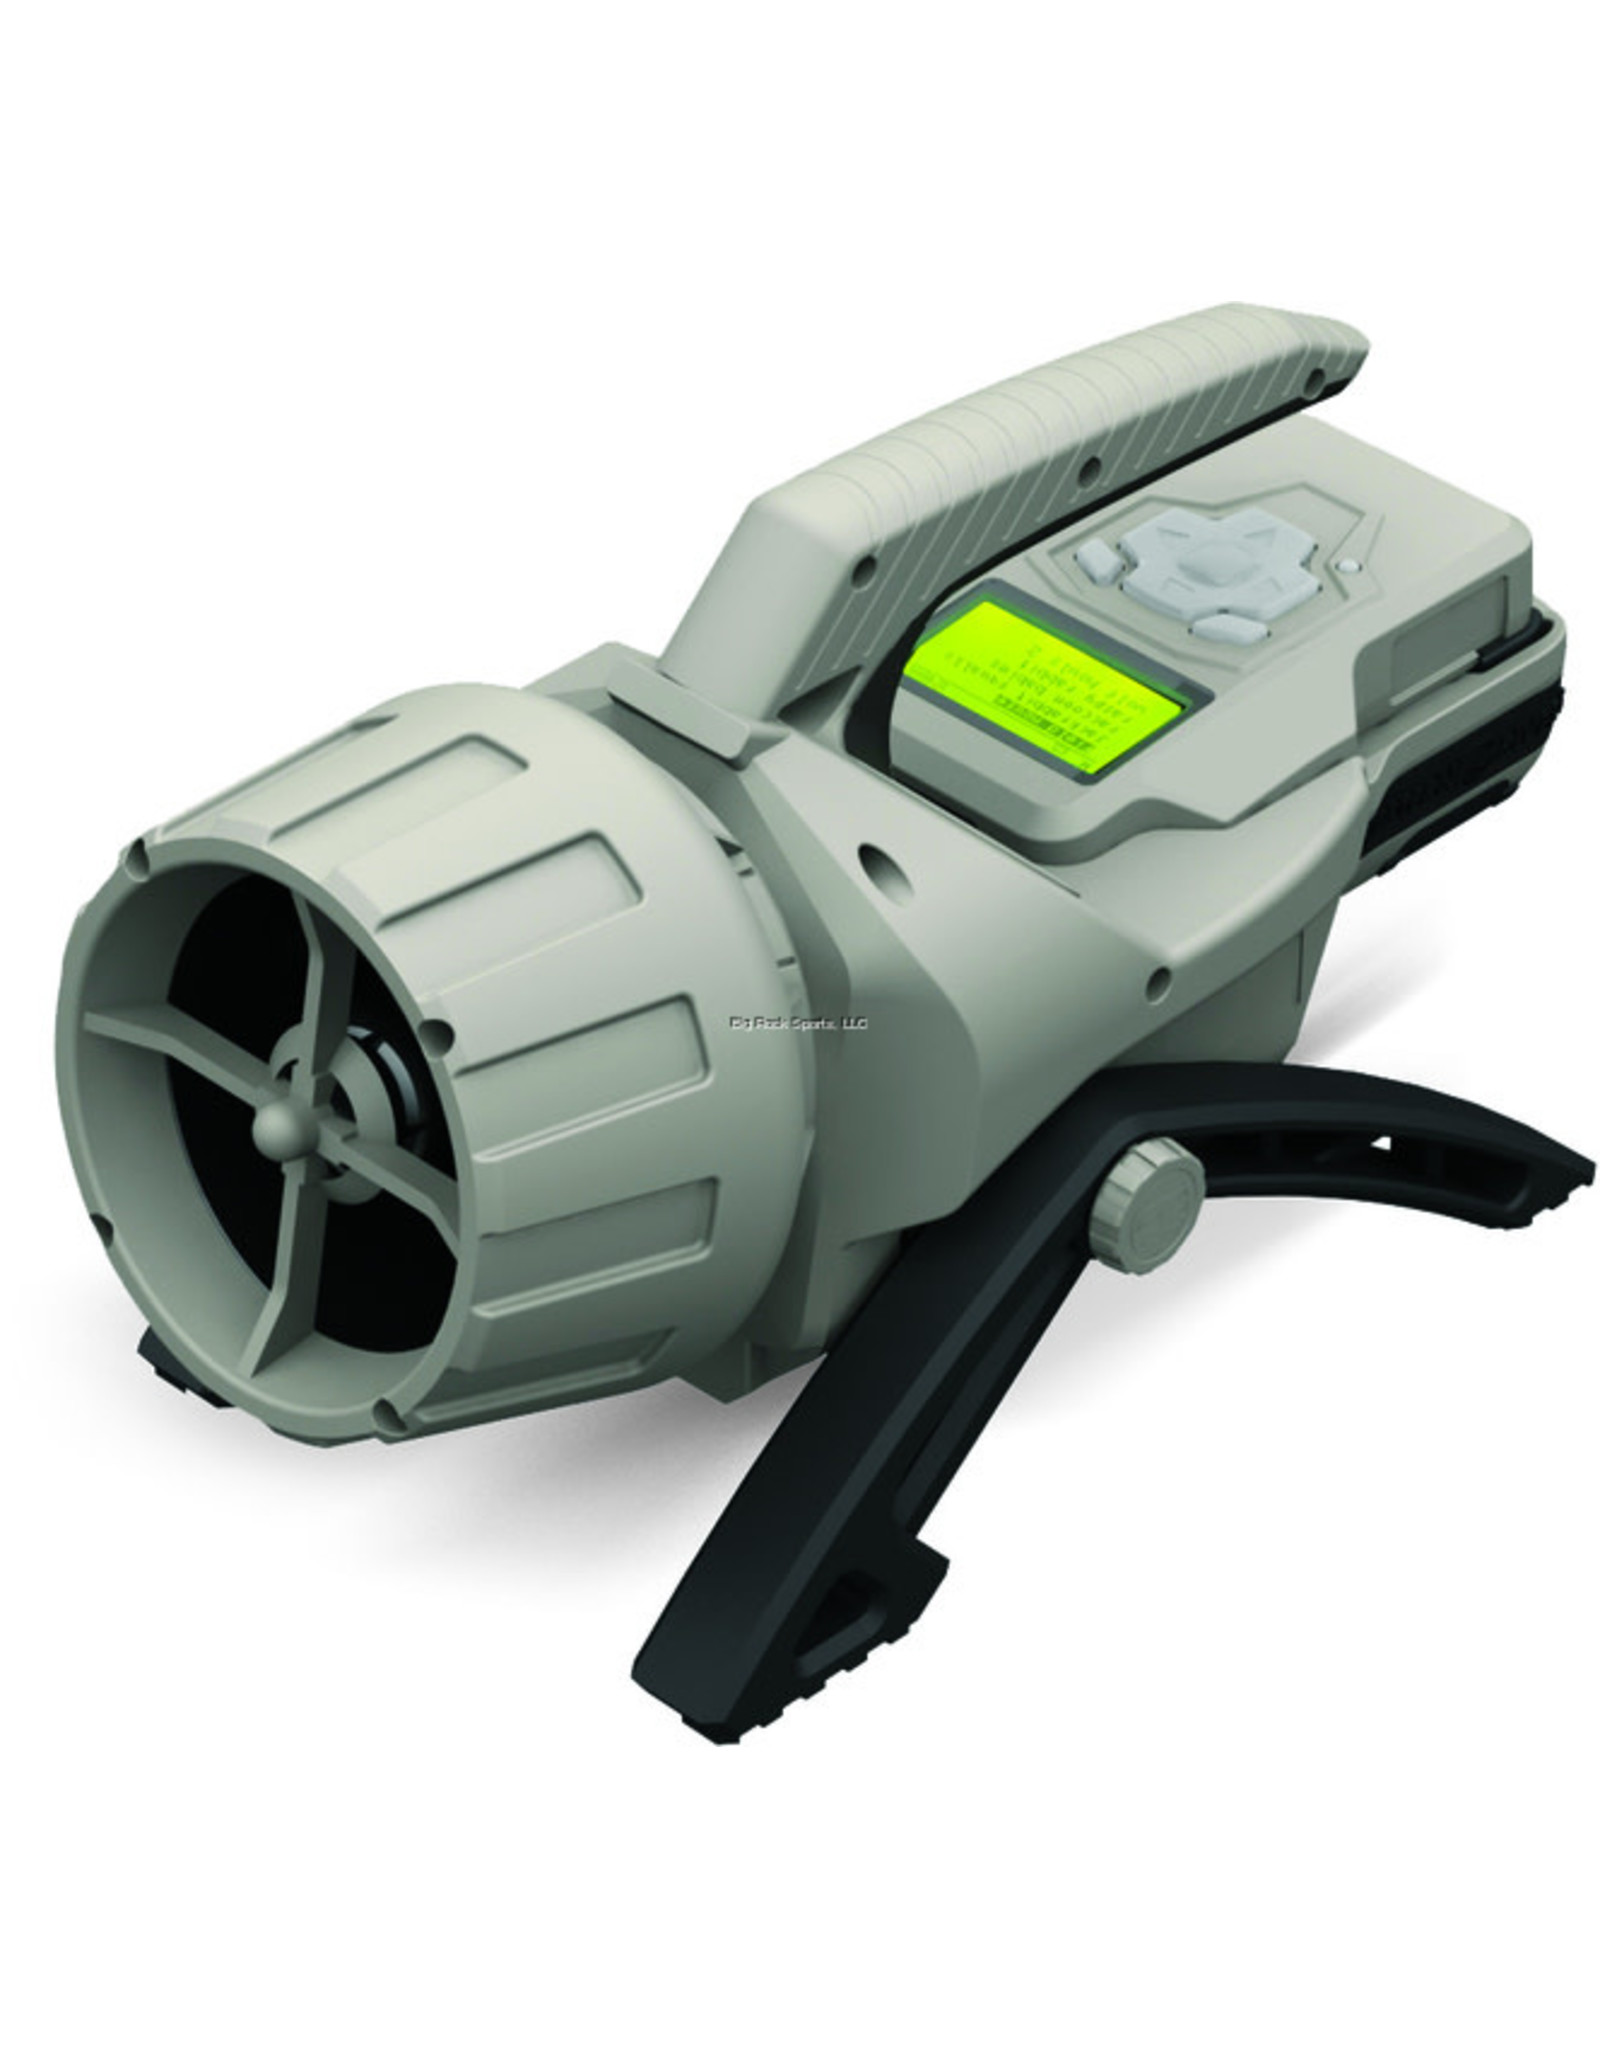 Western Rivers WRC-MP100 Mantis Pro 100 Electronic Game Call, 105 to 110dB, Stores 100 Sounds, Remote Control (234514)